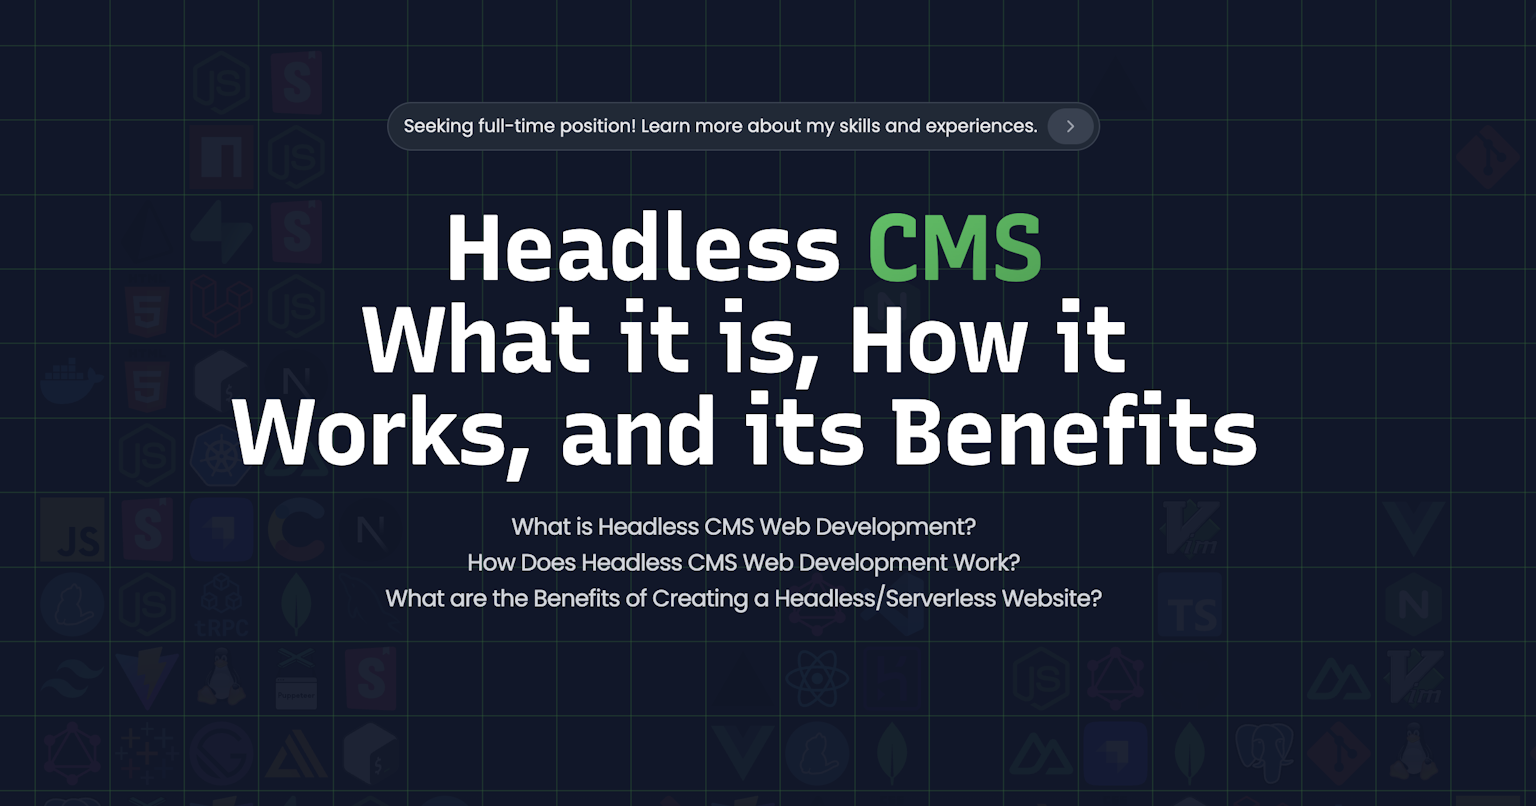 Headless CMS - What it is, How it Works, and its Benefits